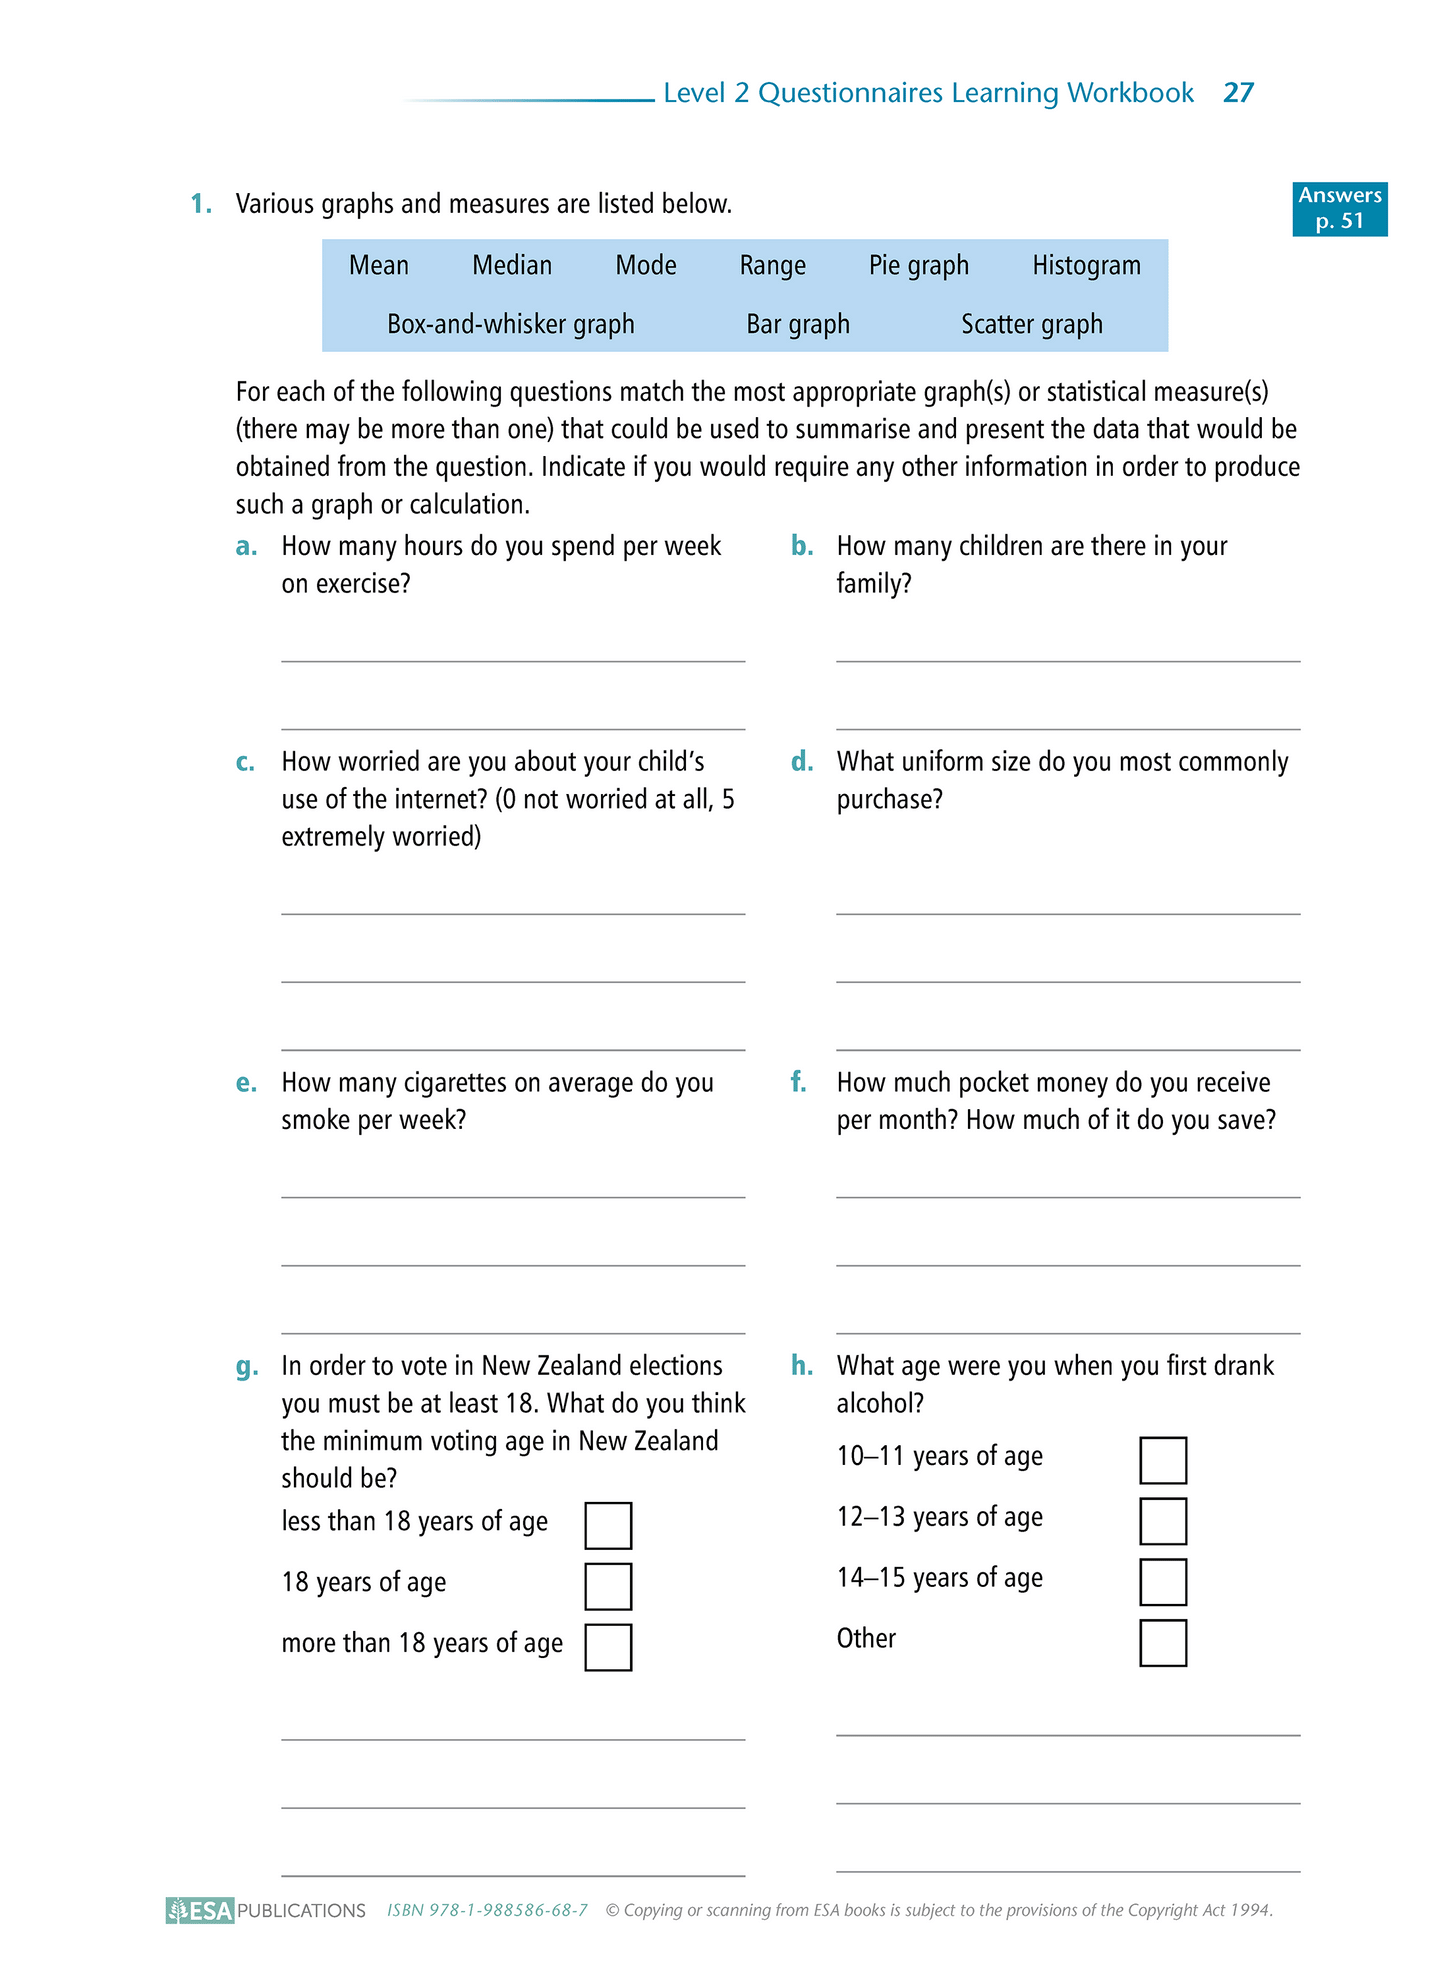 Level 2 Questionnaires 2.8 Learning Workbook